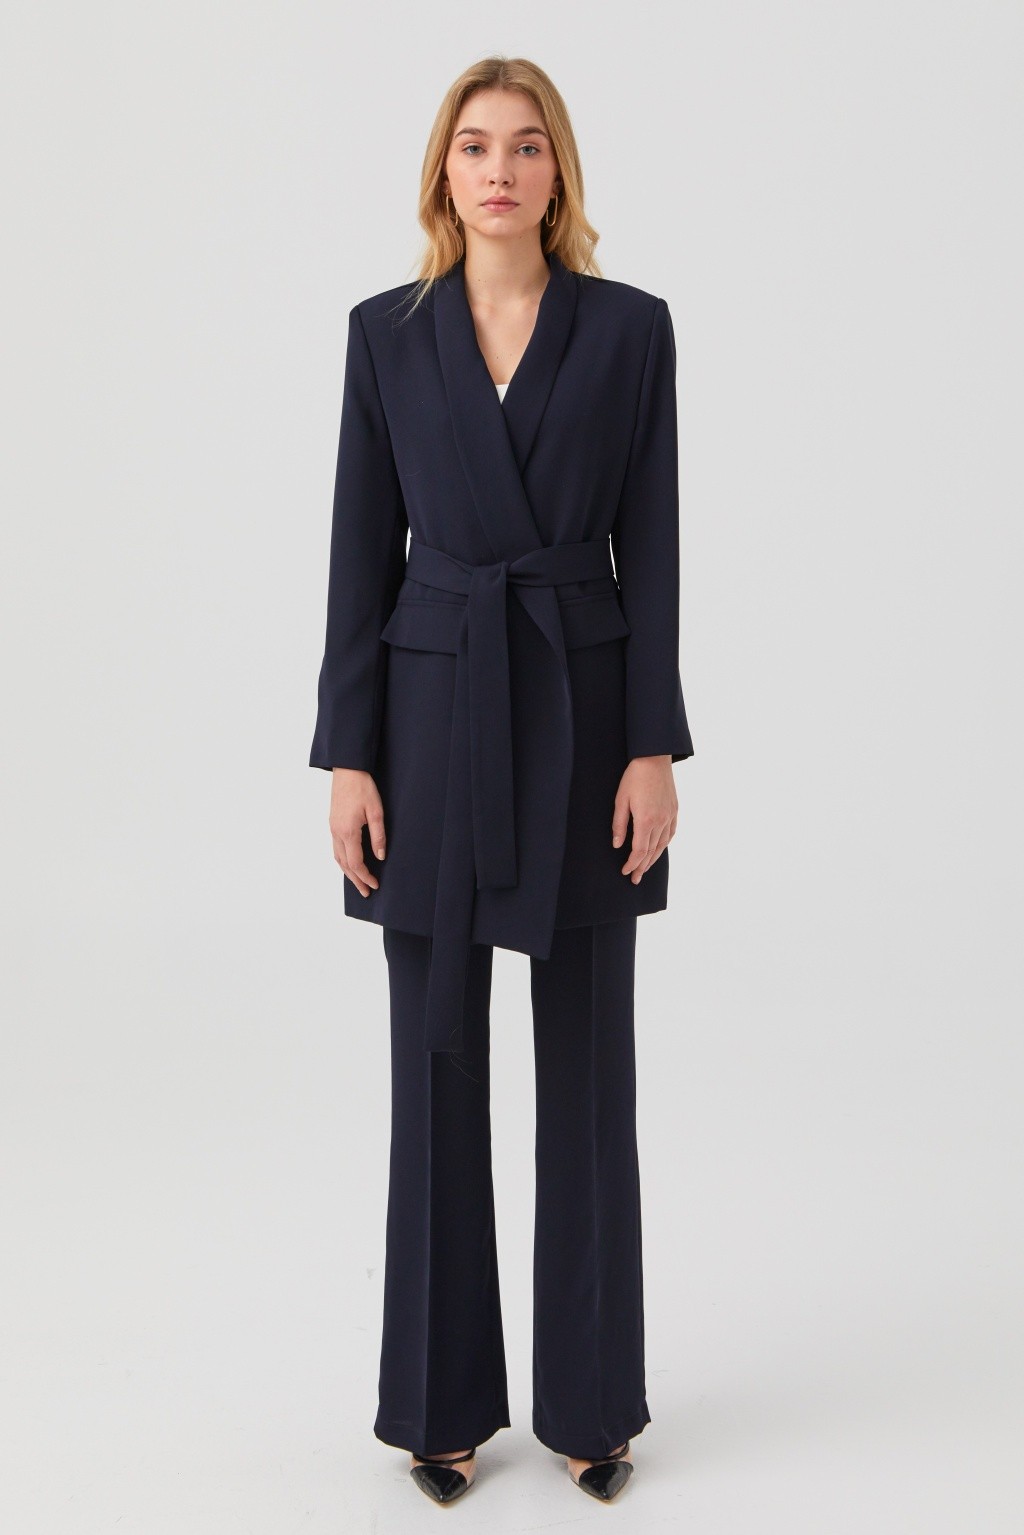 Shawl Collar With Belt Suit Navy Blue